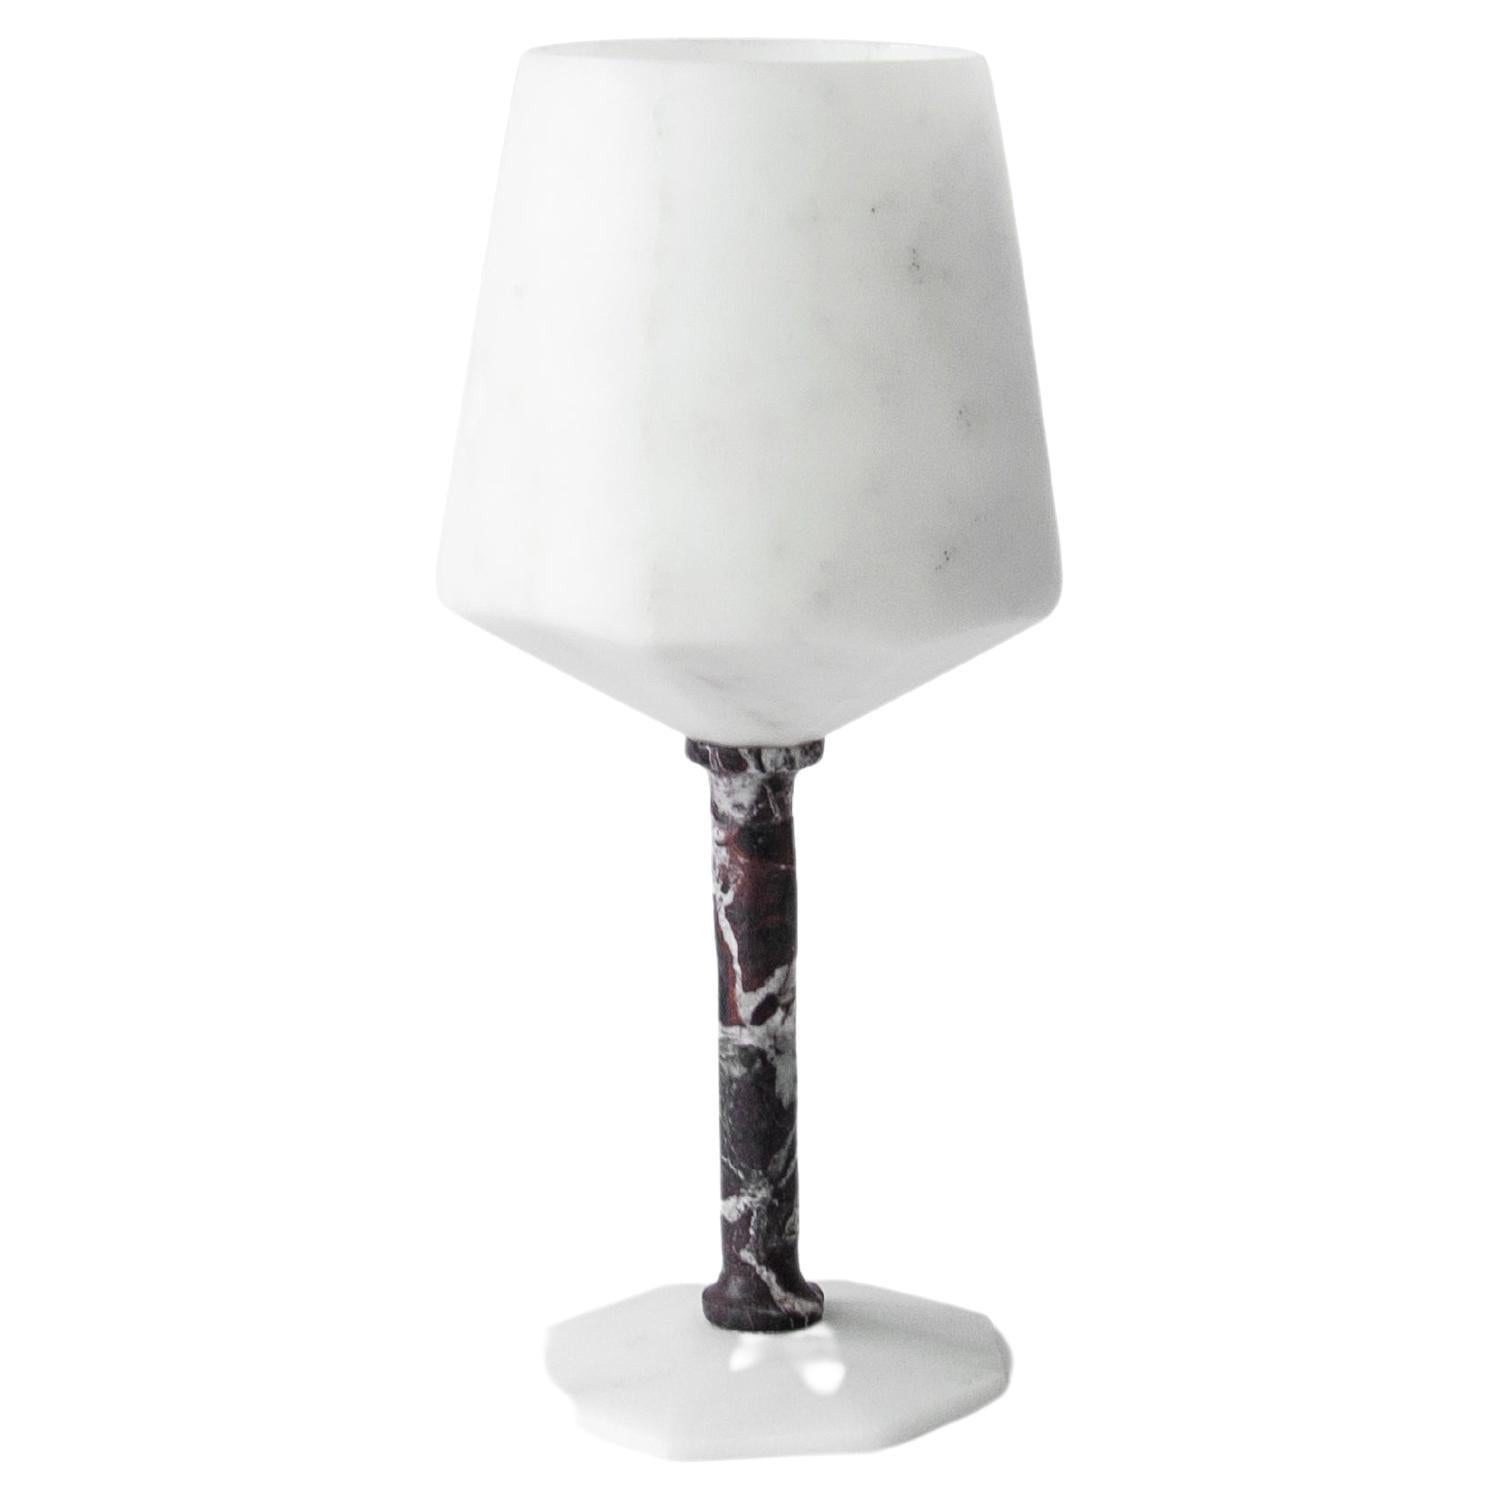 Handmade Wine Glass in Satin White Carrara and Red Levanto Marble